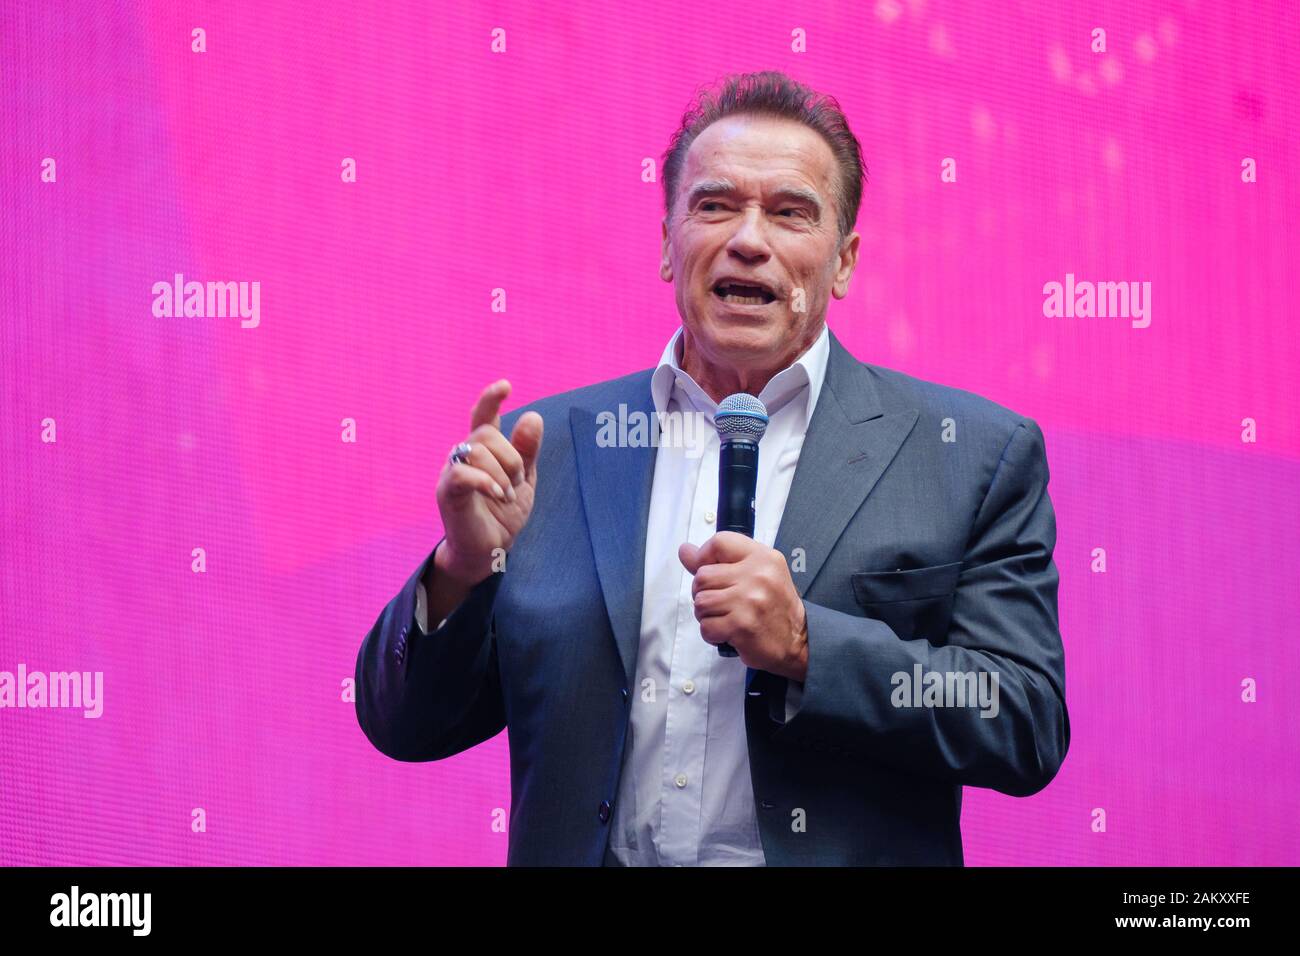 Arnold Schwarzenegger, famous actor, politician and businessman, speaks at a business forum Stock Photo